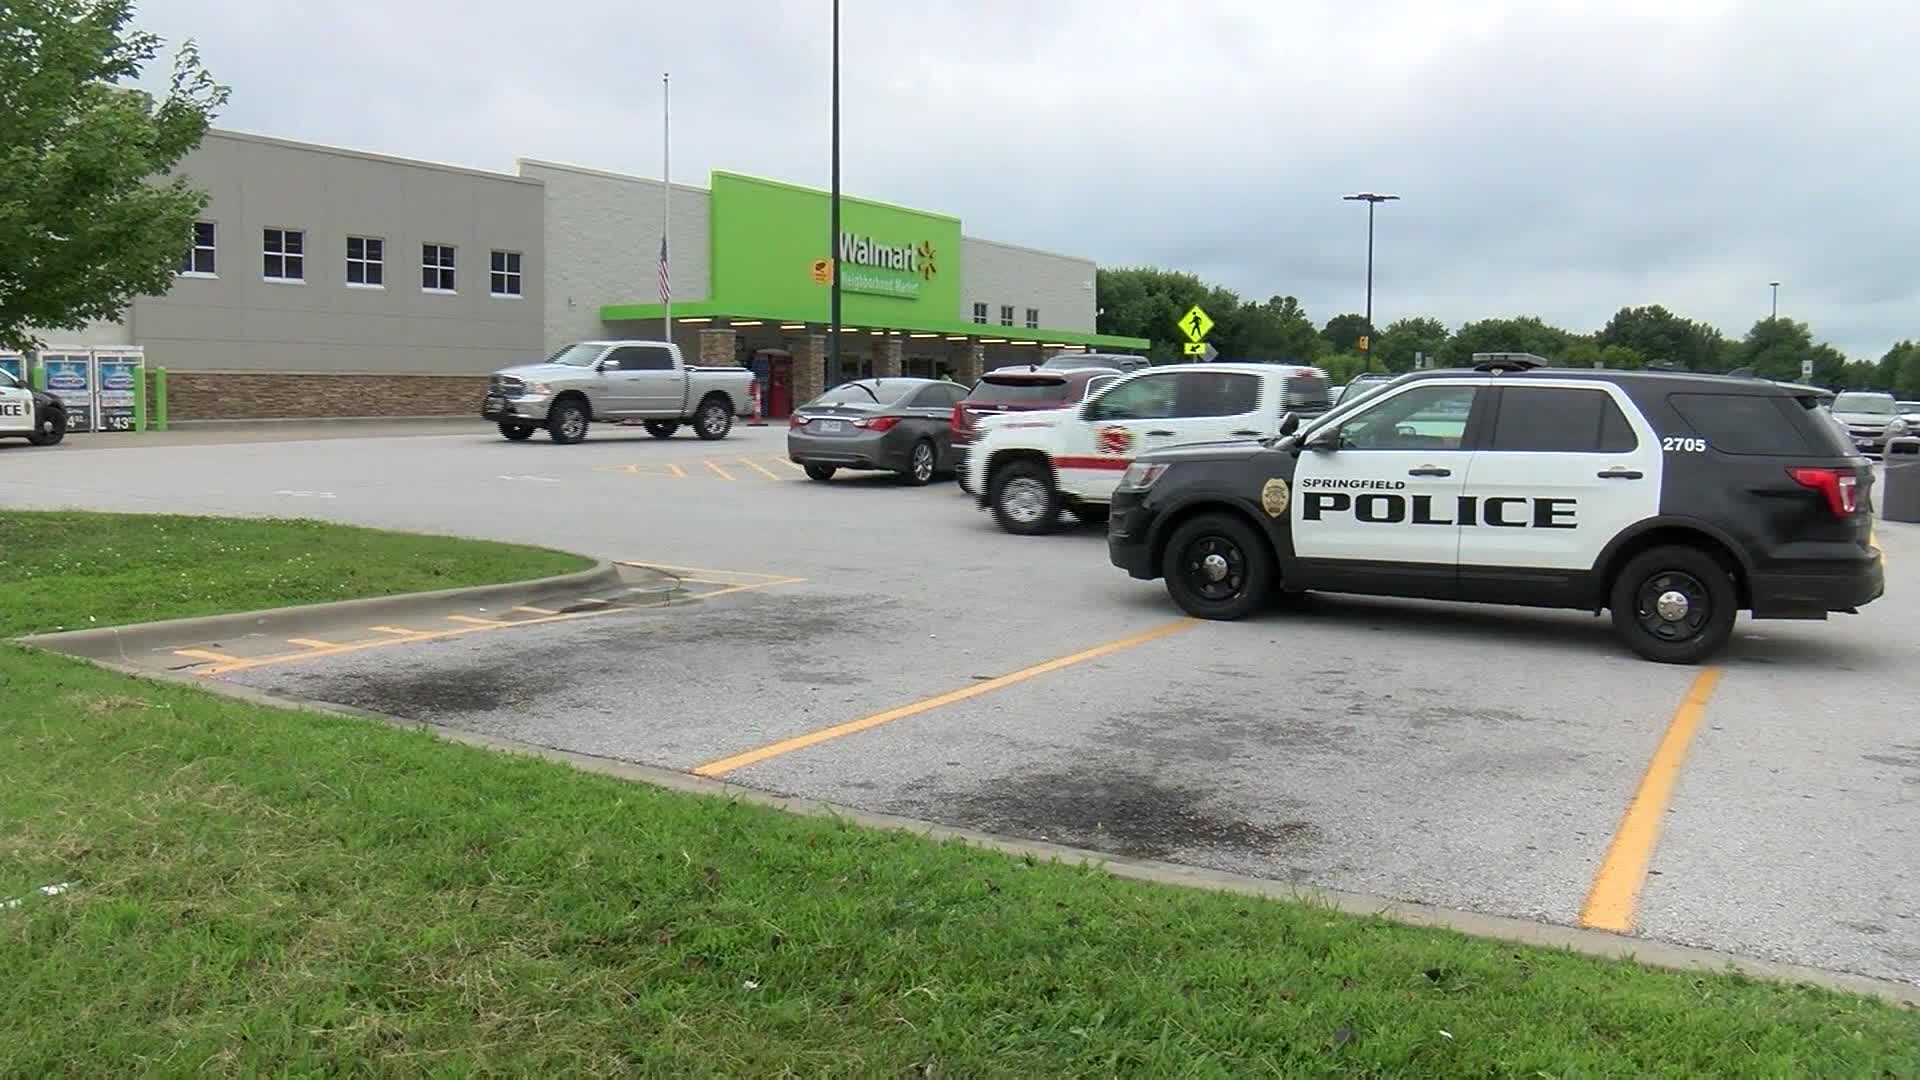 Man with rifle and 100 rounds of ammunition arrested at Missouri Walmart